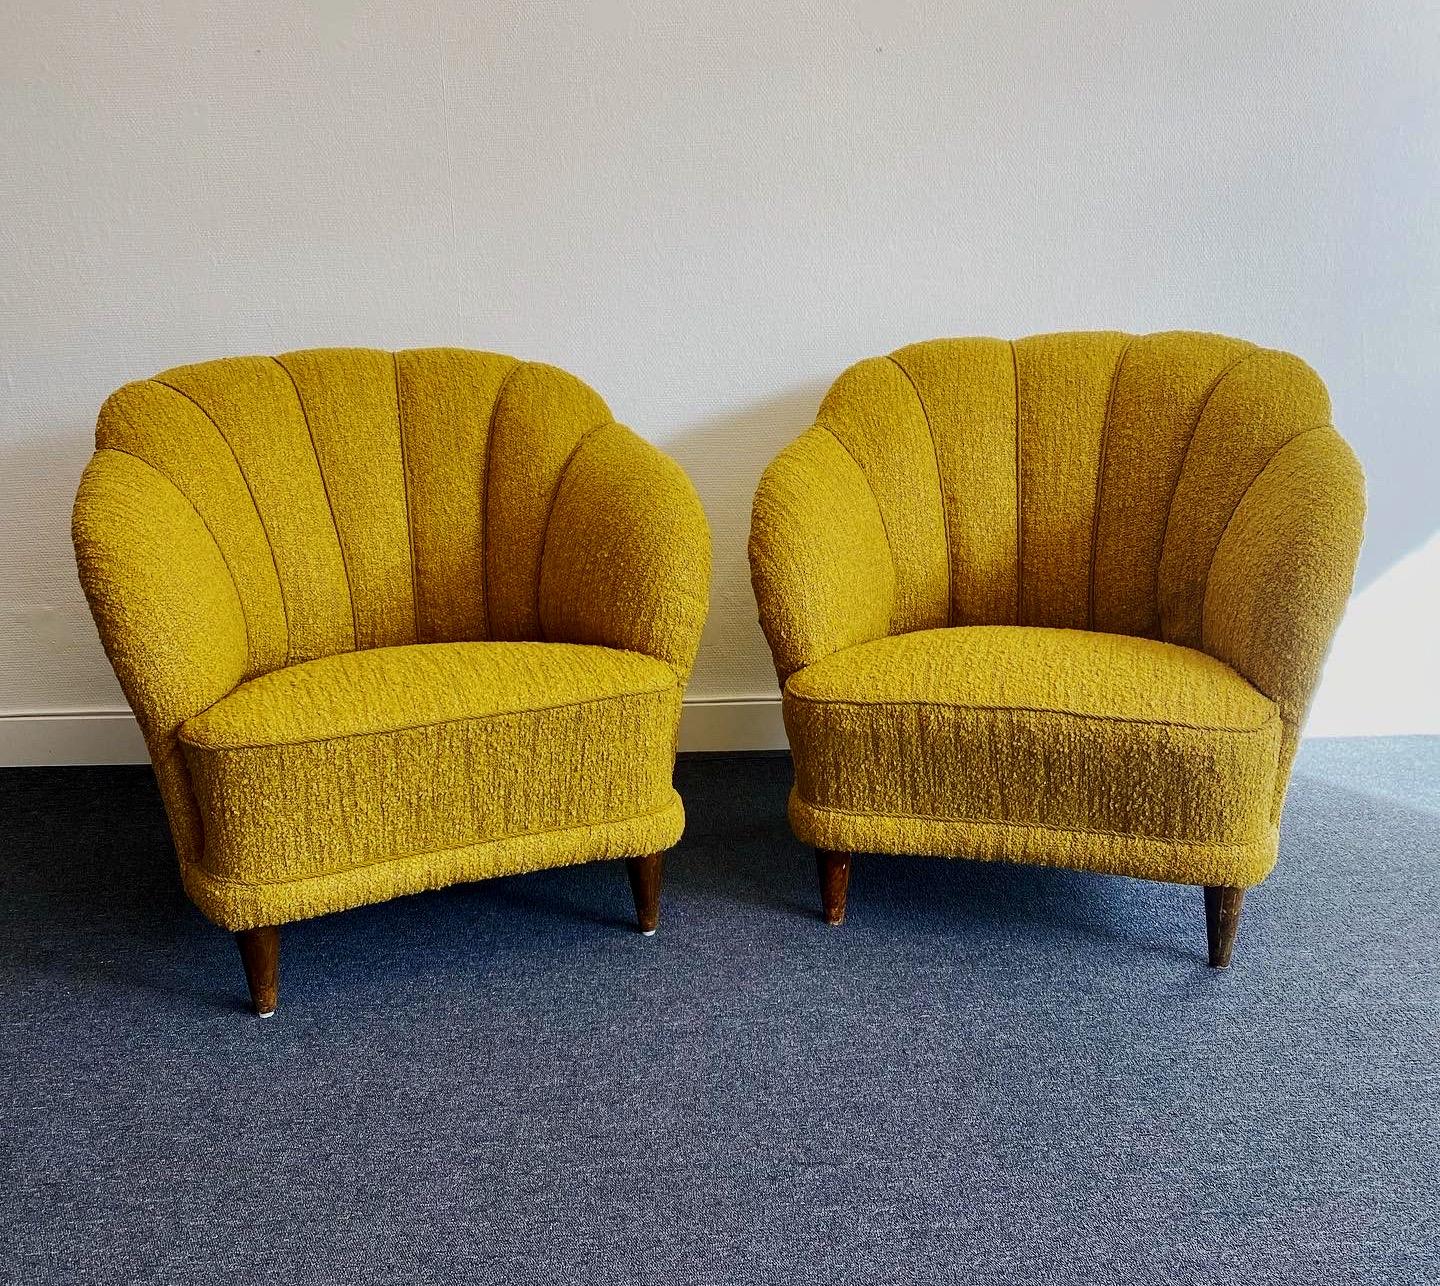 A pair of club chairs attributed to Carl-Johan Boman (Finnish 1883-1969), Circa 1940s. Probably produced by Oy N. Boman AB, Turku, Finland. 
Exclusive and extremely comfortable chairs with generous armrests and curved, encompassing shell-shaped